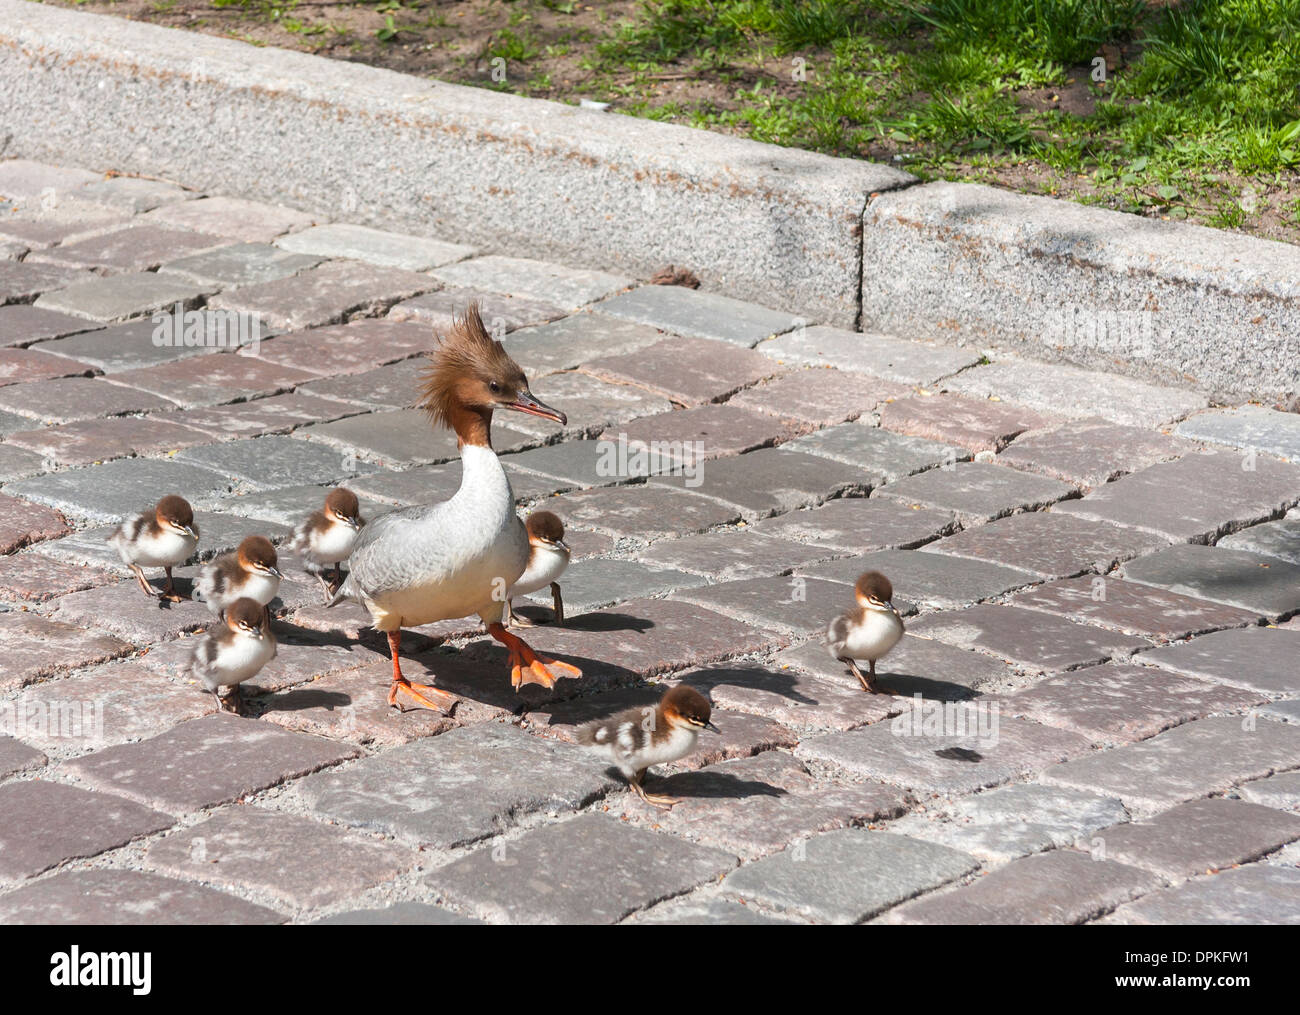 Family of Great crested grebe lost on a city street in the Old Town of Tallinn, Estonia Stock Photo